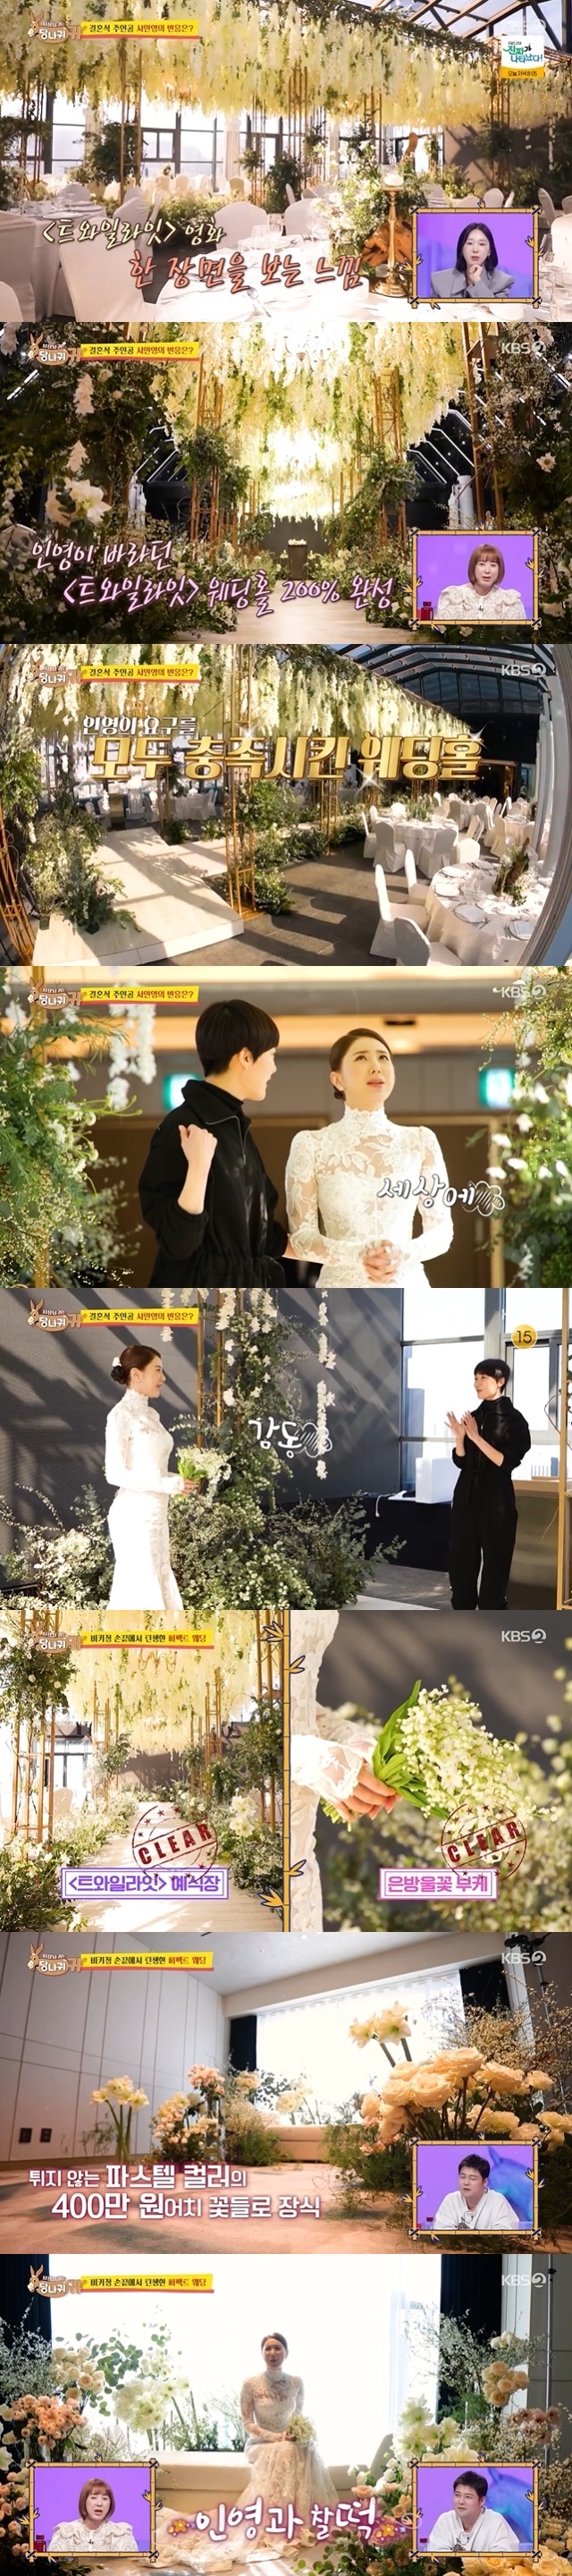 Seo In-youngs marriagea wedding hall, which recently unveiled a private marriage ceremony, was unveiled.Seo In-youngs marriagea wedding hall was unveiled at the 202nd KBS 2TV entertainment show Boss in the Mirror (hereinafter referred to as Donkey Ears), which aired on April 9.Miss Vicki, who made a wedding hall all night with 50 people from 1:00 am to the daylight.She wanted an outdoor marriage ceremony, but for Seo In-young, who could not make Romang because of the weather, she decorated a wedding hall with 4,000 flowers for Special Air Service.Miss Vicki explained that the money spent on a wedding hall flower is a lot of 100 million won.The marriage ceremony was completed on the day, and the bride Seo In-young in the wedding dress confirmed the appearance of a wedding hall directly.As soon as I saw the inside, Seo In-young admired the appearance of a wedding hall with about 100 million won worth of floral decorations, saying, Oh my gosh. Seo In-young said, I can not do it with money.Its so vintage and pretty, he said, garnering praise.Seo In-young said, Its exactly what I wanted. I was worried that it would be too much, but its not too much and its too beautiful. I love the chandelier. I could shoot a movie.Miss Vicki Jung, who realized Seo In-youngs Twilight wisteria flower Romang, said, There are 3,000 flowers hanging on the flower. Seo In-young said, I was so touched.The silver droplet flower Nosegay, which stars such as Ko So Young wrote as Nosegay, was also held in the hands of Seo In-young.The silver droplet flower that should be ordered three weeks ago was Miss Vicki Jungs special air service in Japan a few days before the marriage ceremony with all the connections. Seo In-young, who had Nosegay in his hand, was also satisfied with the taste of the bride waiting room.Seo In-young said, Flowers are important too. The completion of the marriage ceremony is a flower.I made it with the marriage ceremony of my dreams. Thank you, Mr. President. I think that the marriage ceremony is perfect and I can live happily.However, Lee Ji-hye, a special MC and married person, said, I do not care about living well with flowers and marriage ceremonies. I do not see pictures or videos during marriage ceremonies.